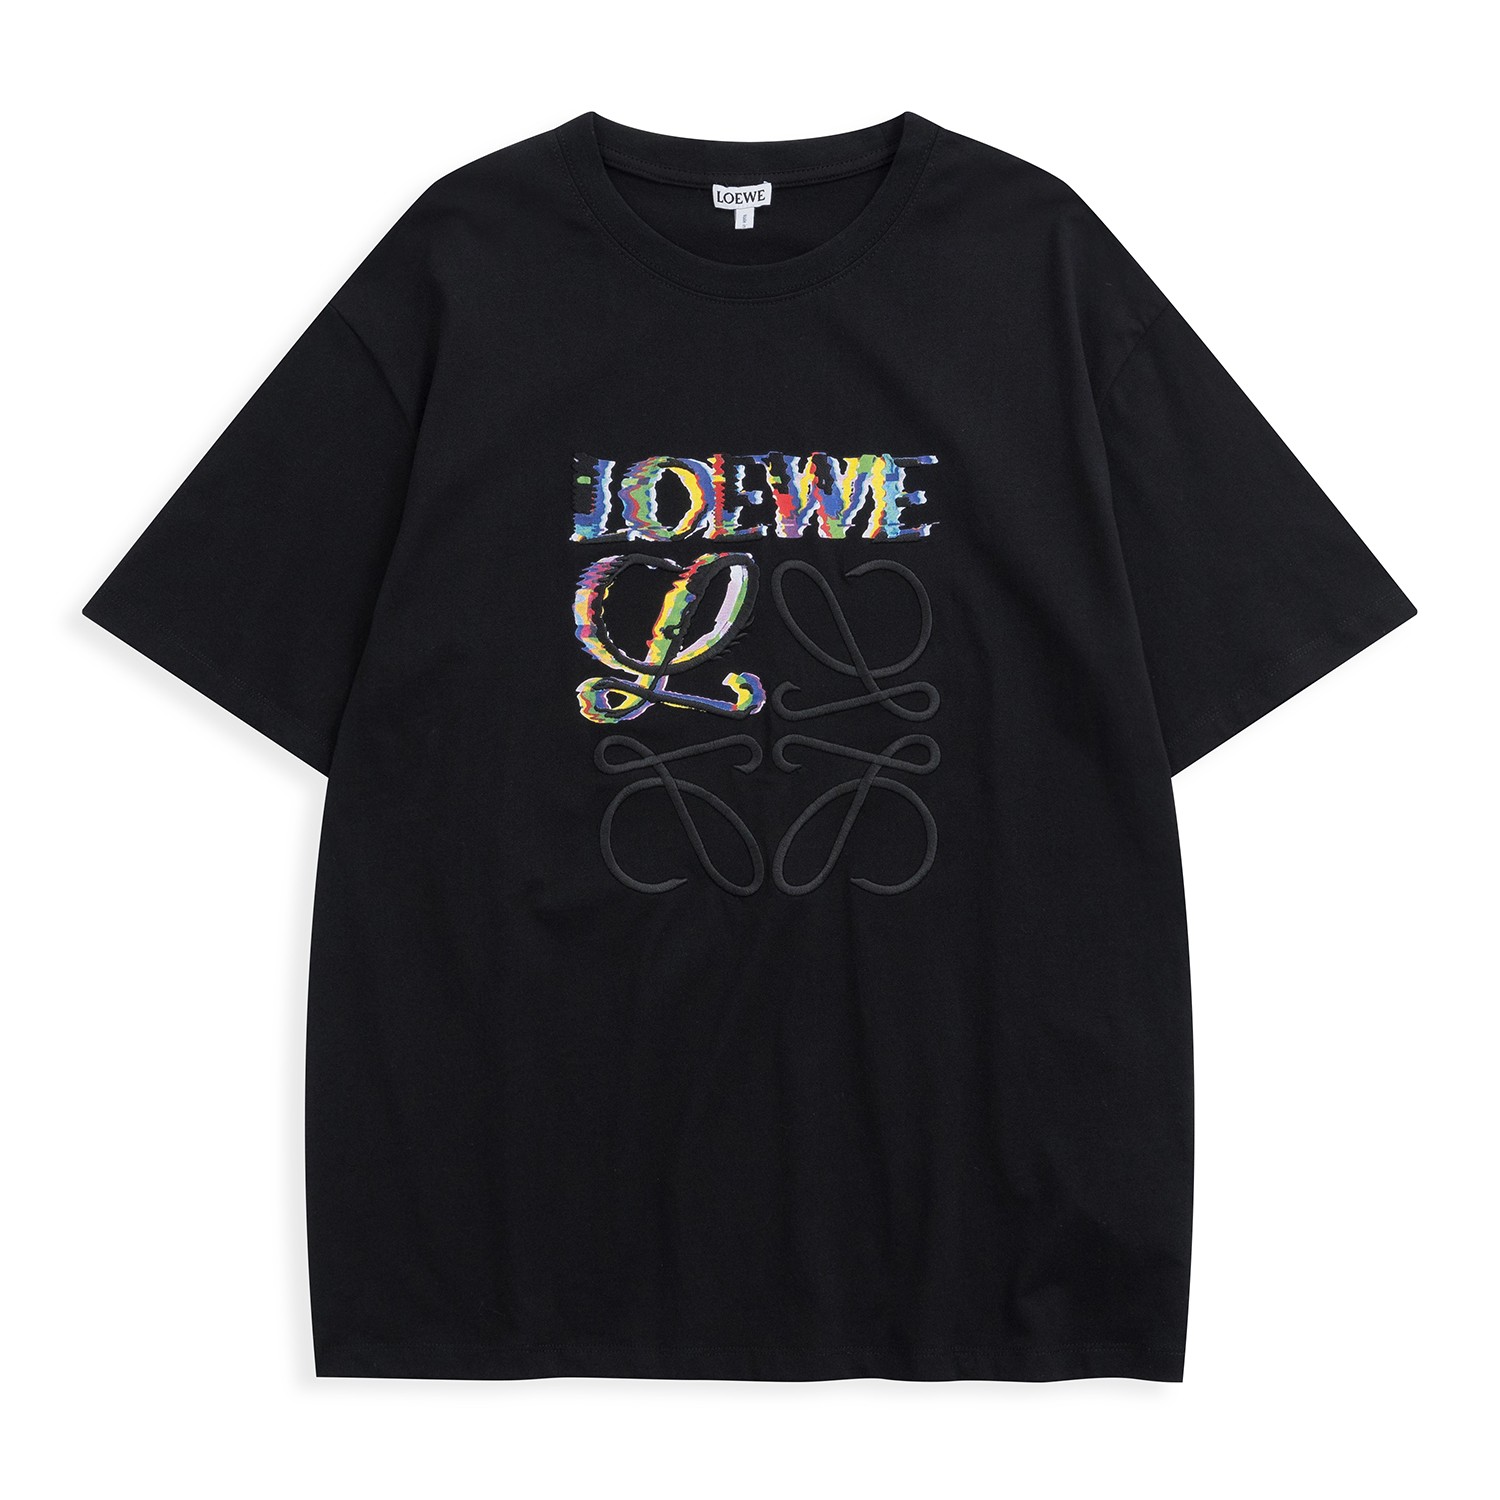 How to Find Designer Replica
 Loewe Clothing T-Shirt Black White Embroidery Cotton Foam Spandex Short Sleeve